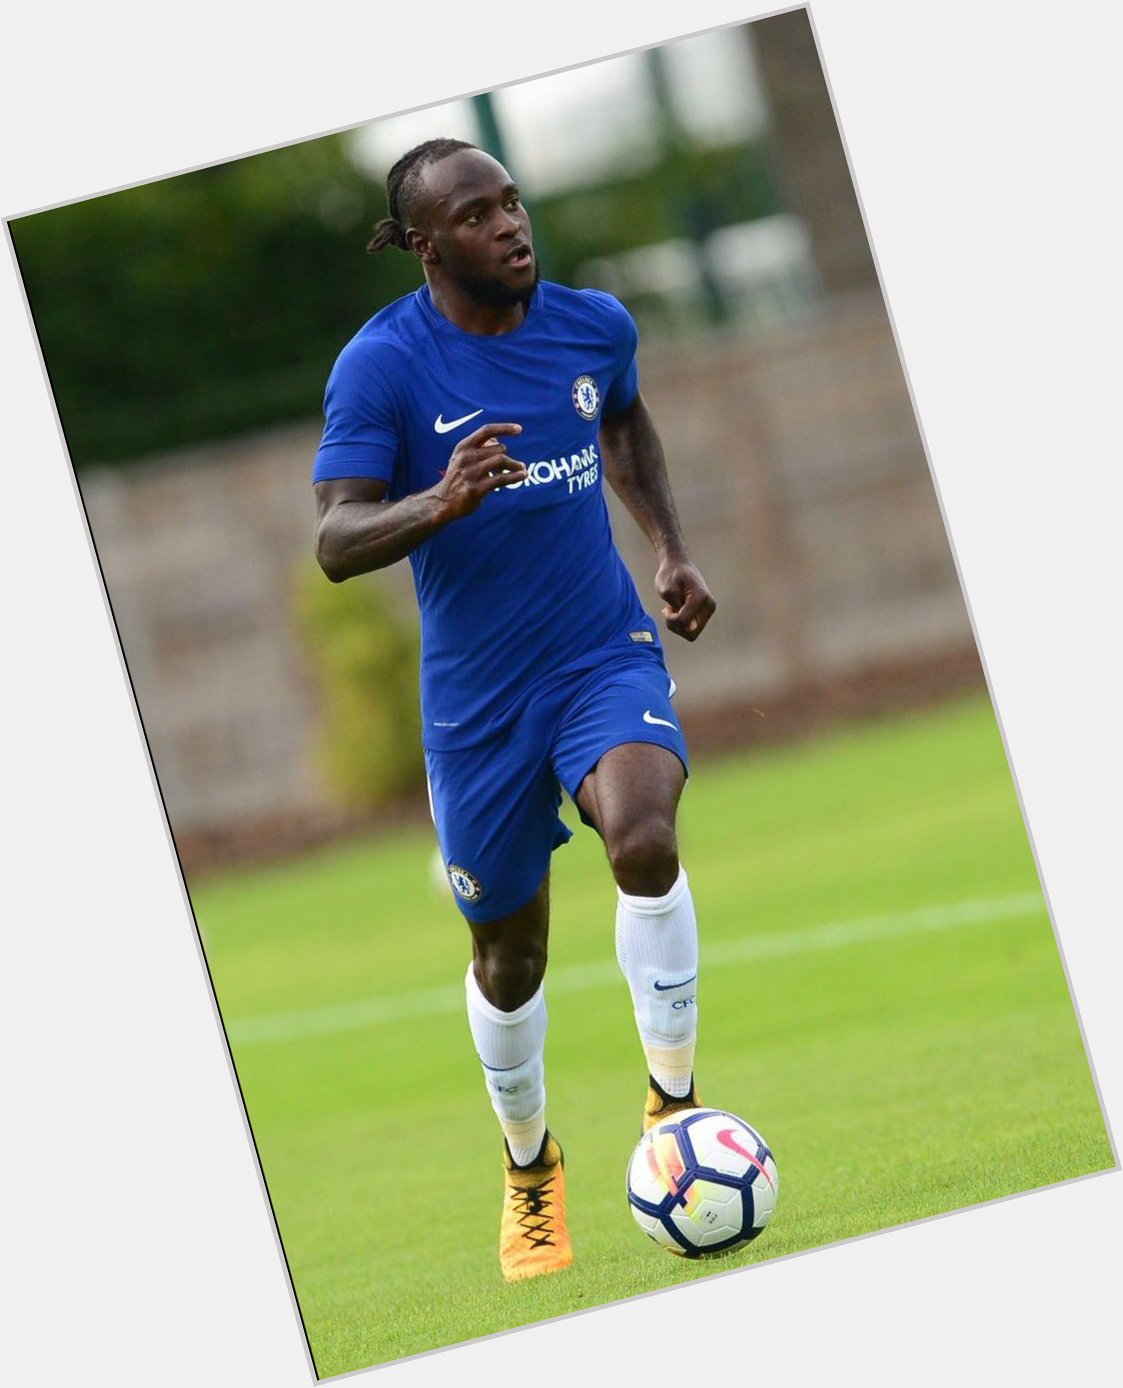 Happy Birthday To Moses
Chelsea Player And Nigerian Player
Enjoy your day 